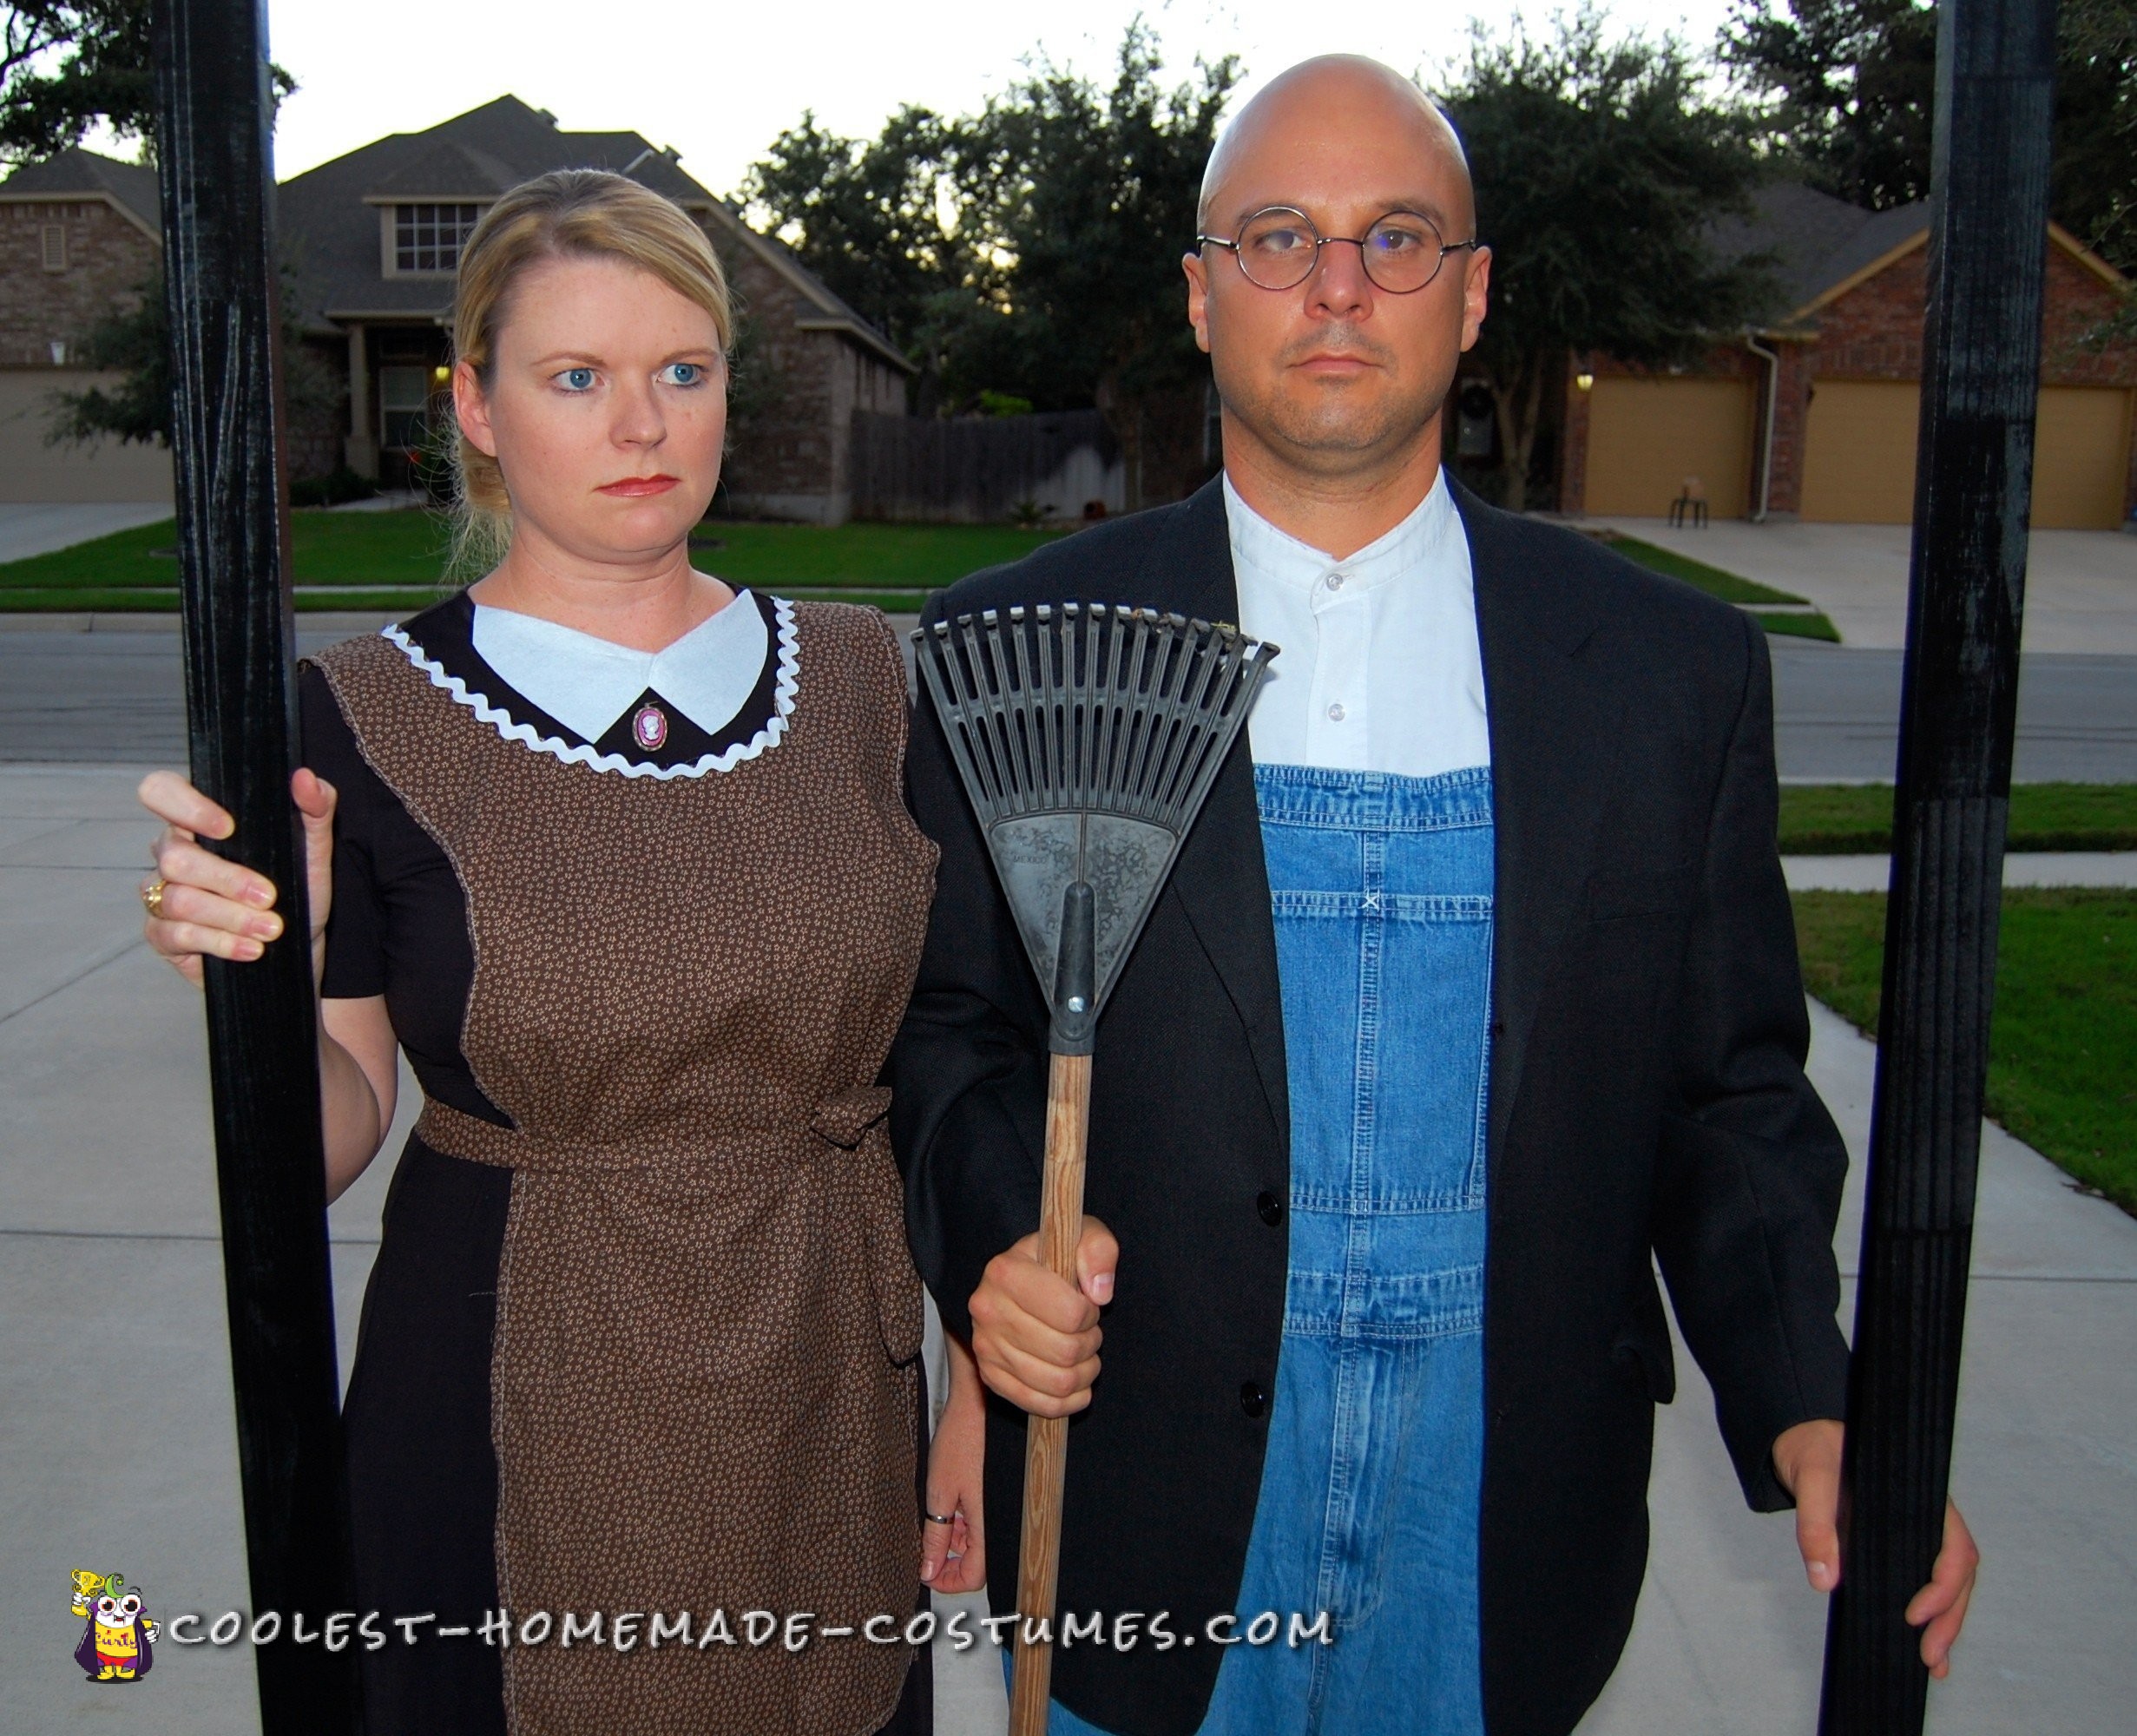 https://www.coolest-homemade-costumes.com/files/2016/09/couples-american-gothic-costume-152476.jpg